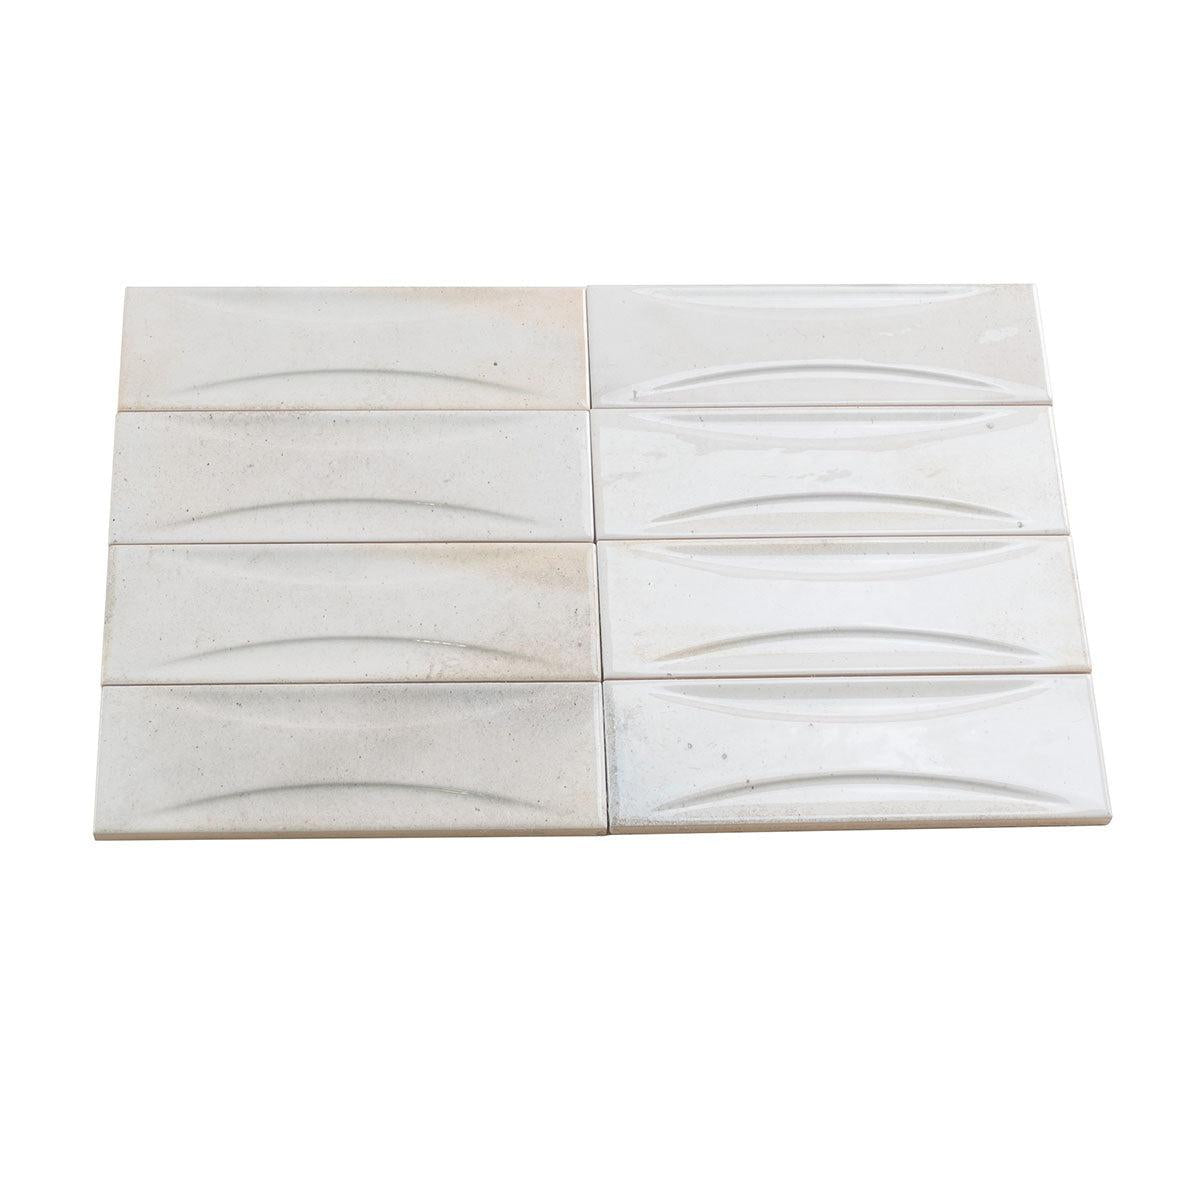 Luna Arc White 2.5x8 | Online Tile Store with Free Shipping on 